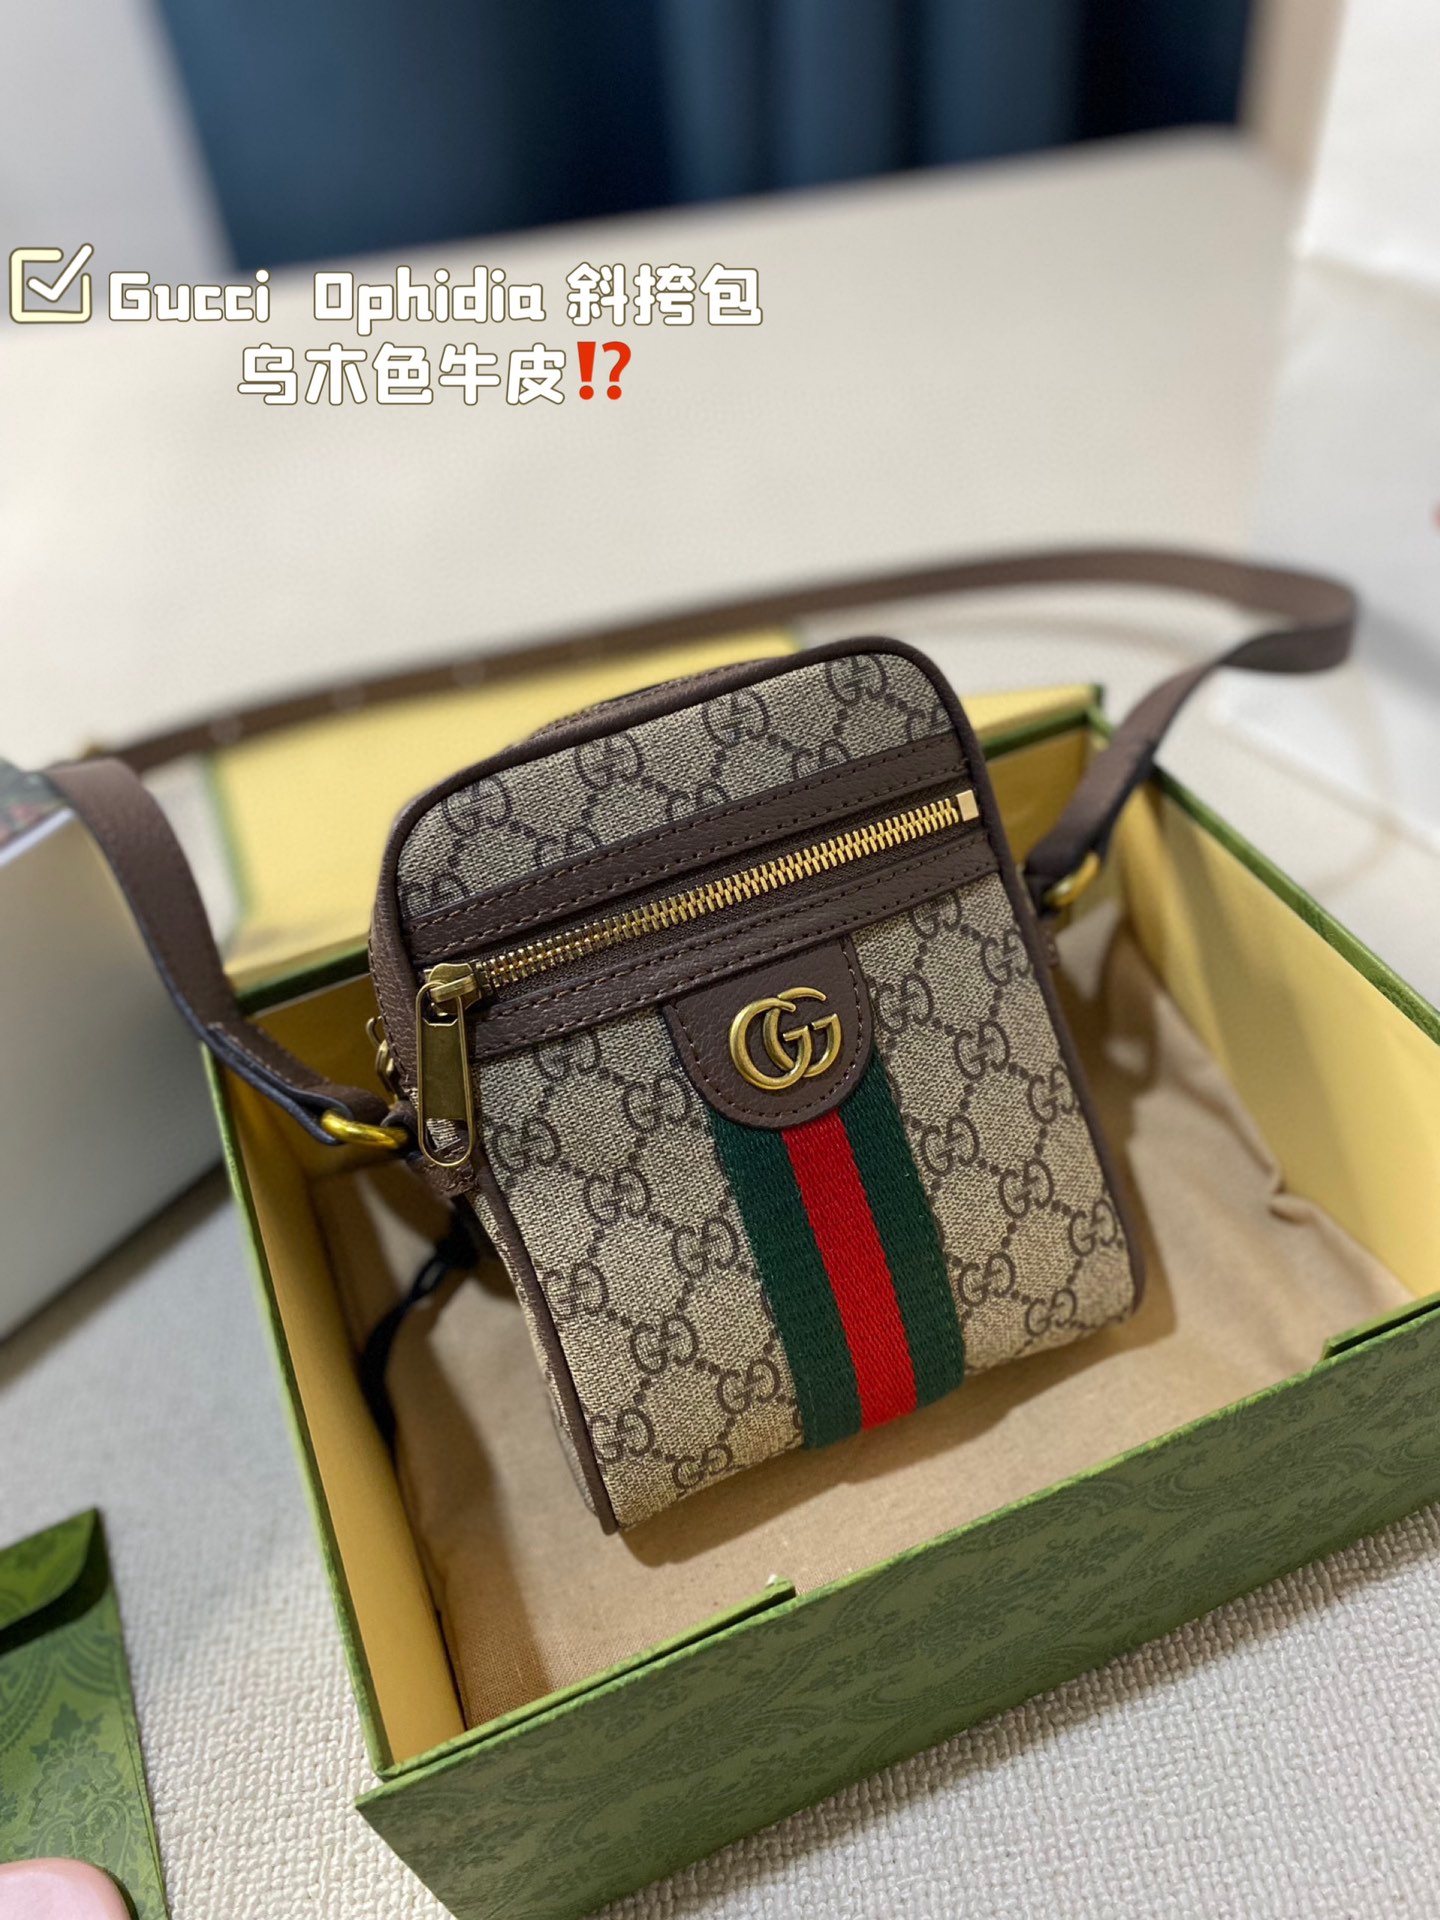 Gucci Ophidia Crossbody & Shoulder Bags Cowhide Vintage Chains